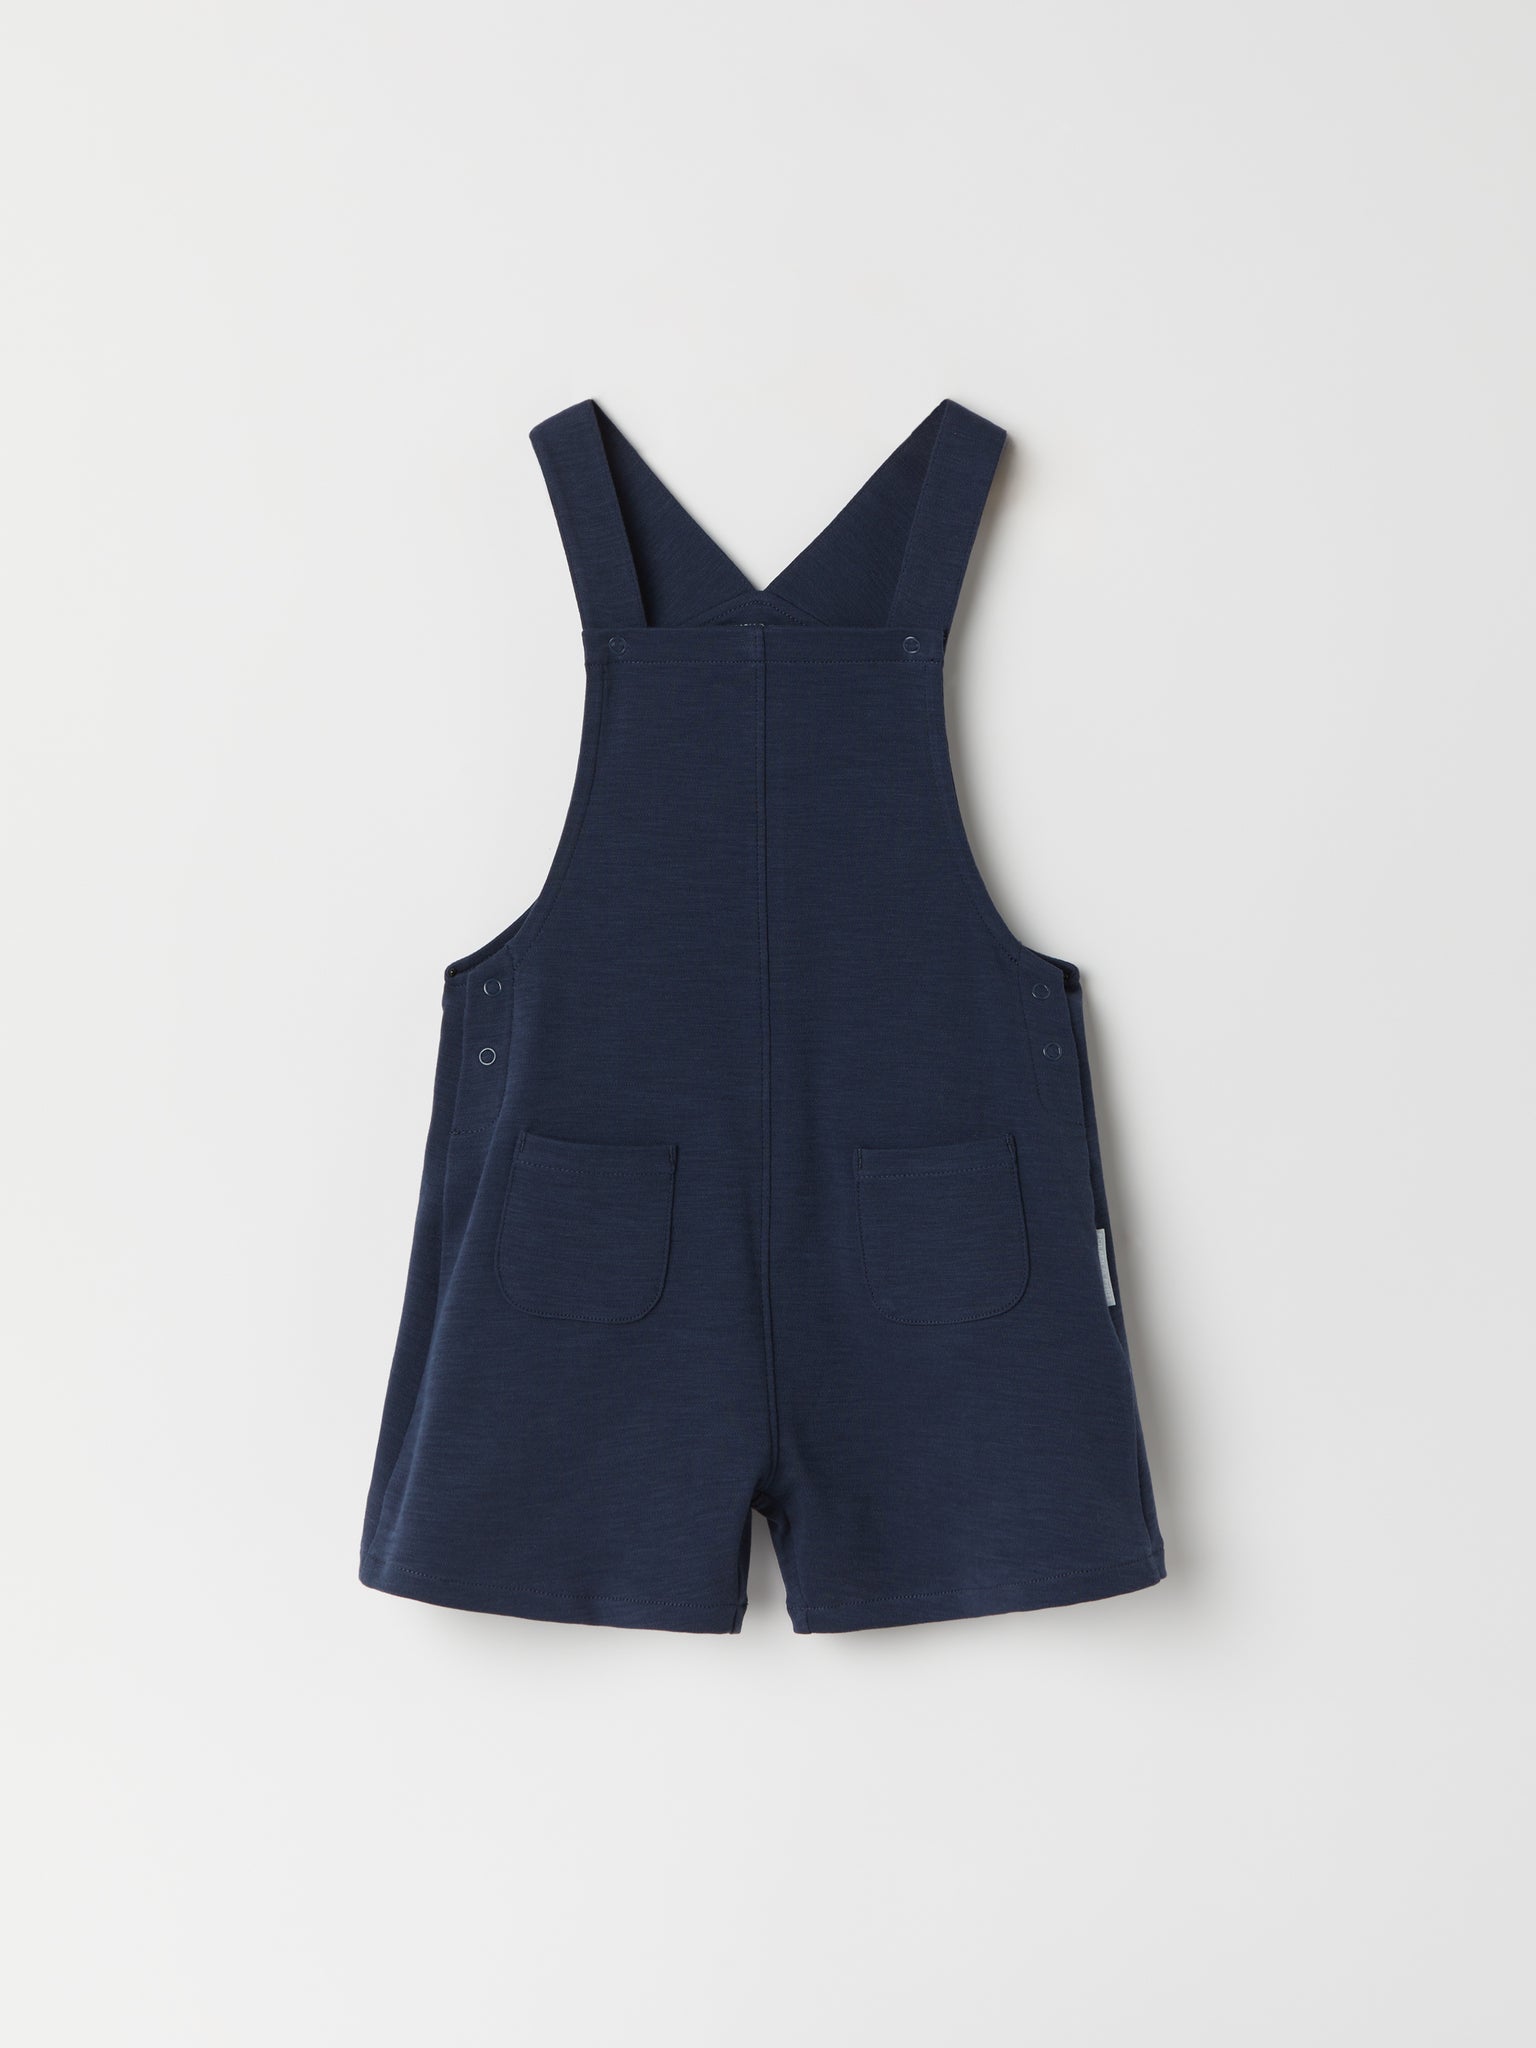 Navy Baby Dungaree Shorts from the Polarn O. Pyret baby collection. The best ethical kids clothes